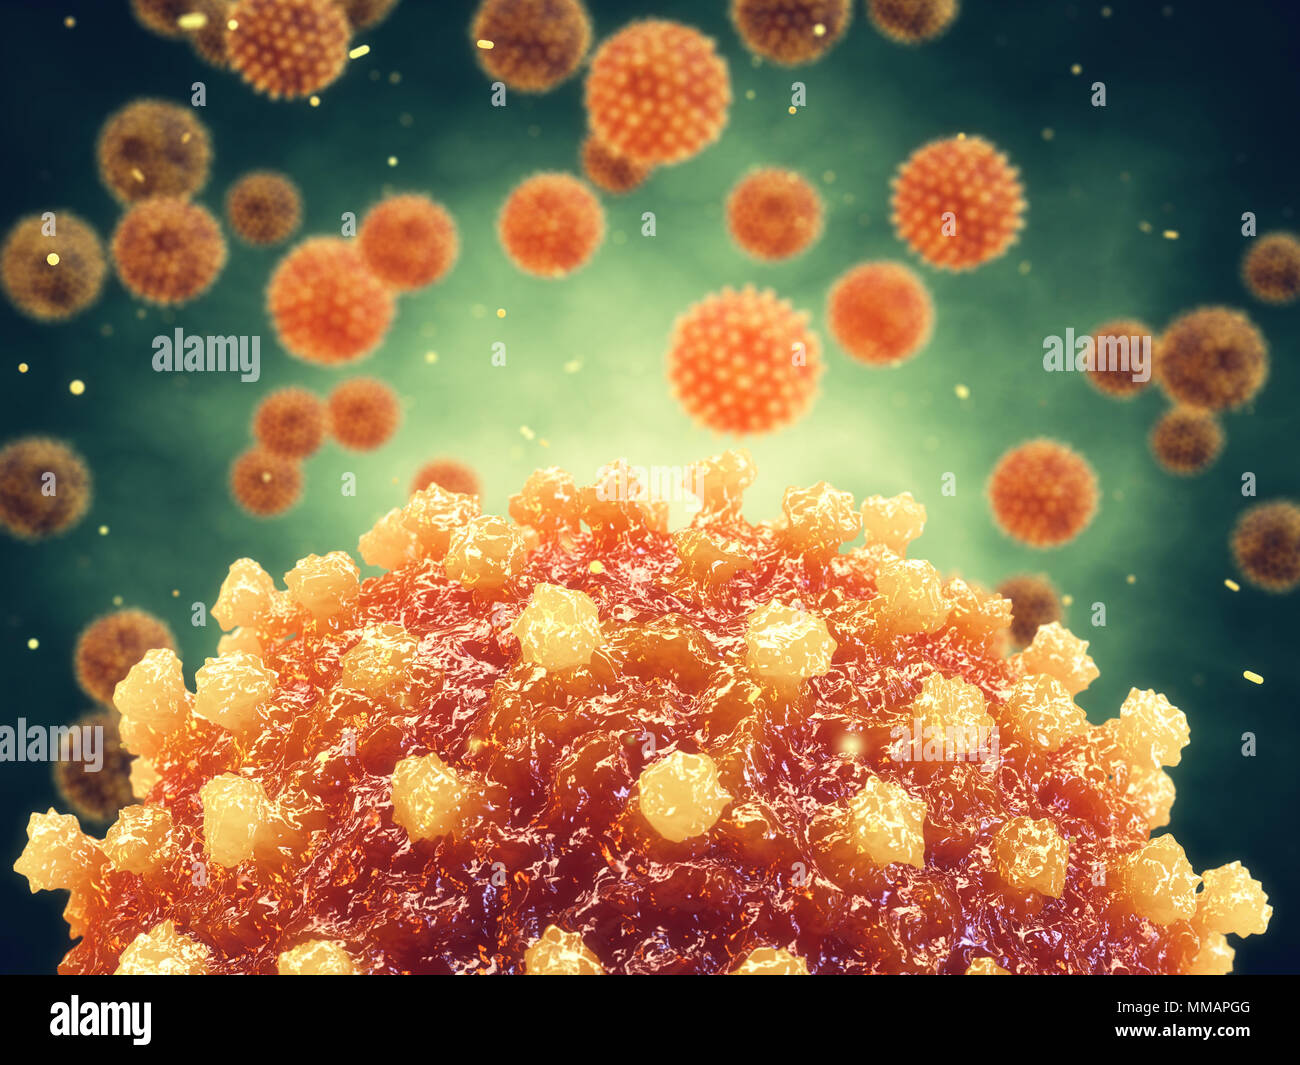 Chronic liver disease can be caused by a viral hepatitis infection, Hepatitis virus Stock Photo